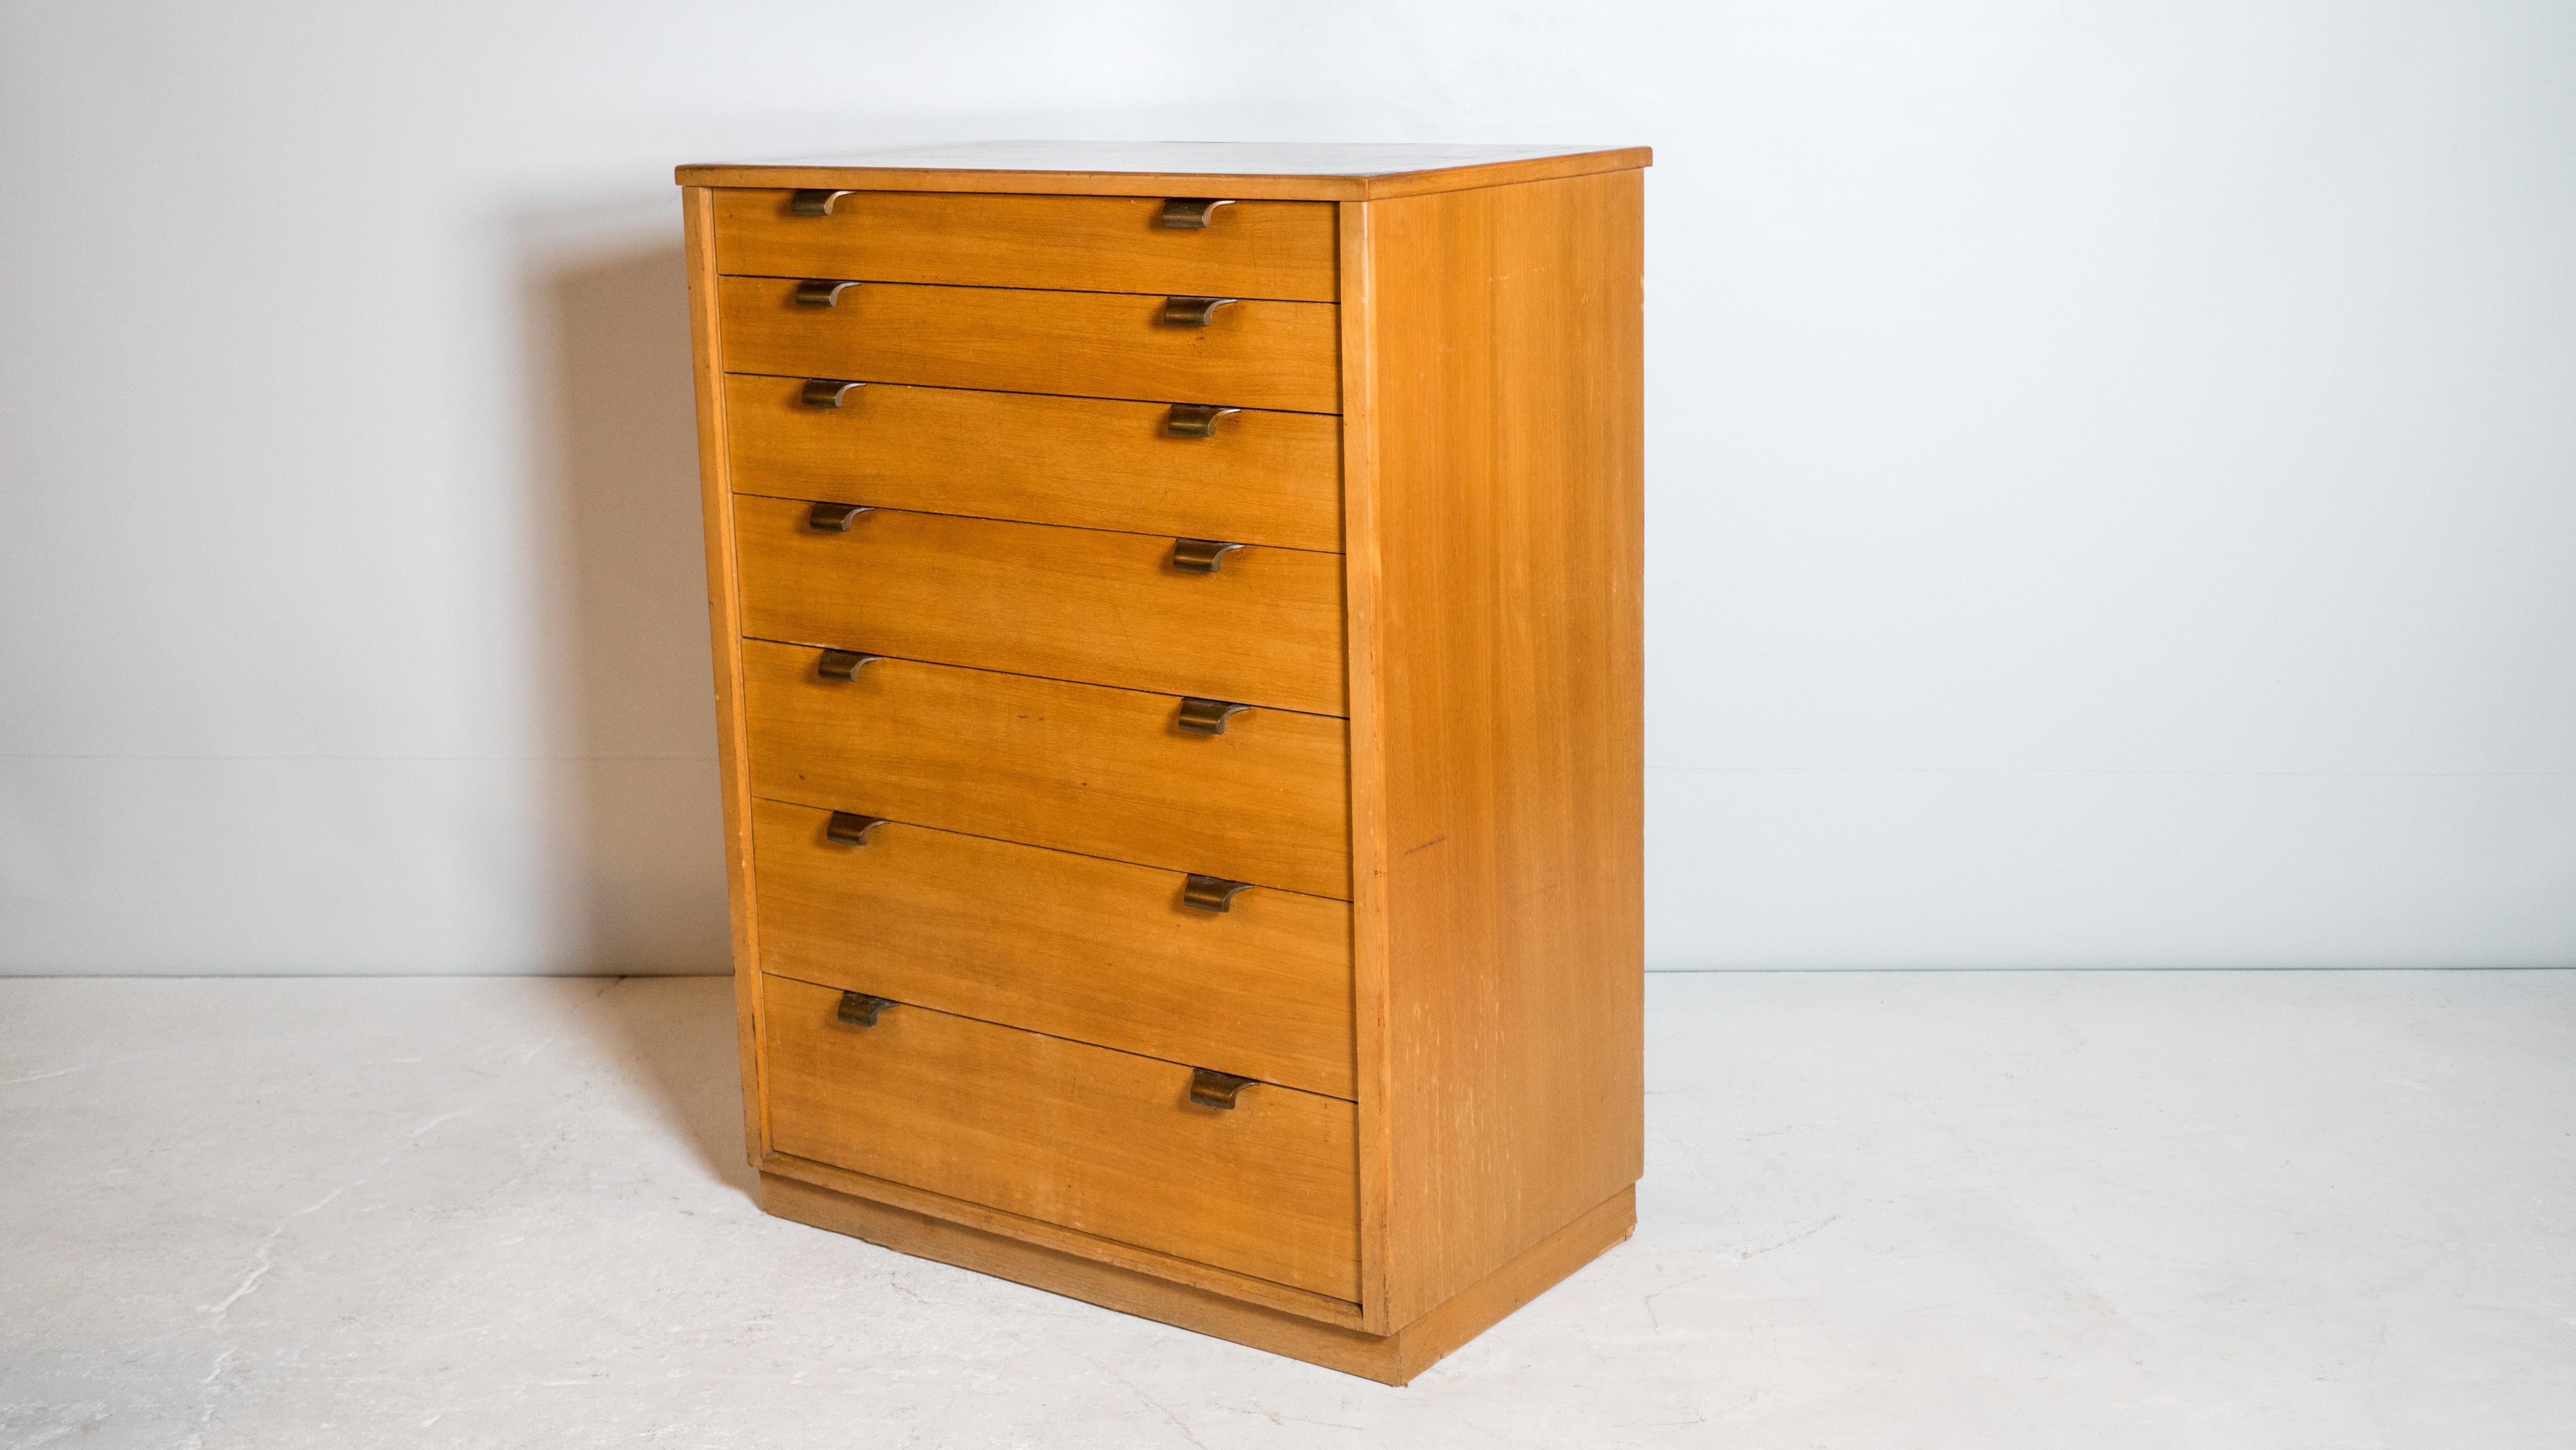 Edward Wormley for Drexel Precedent' Highboy Dresser by Drexel, circa 1950s. Features 7 drawers with original brass pulls and dividers. Clean, simple lines, structurally sound. Good vintage condition, would benefit from refinishing, but presentable